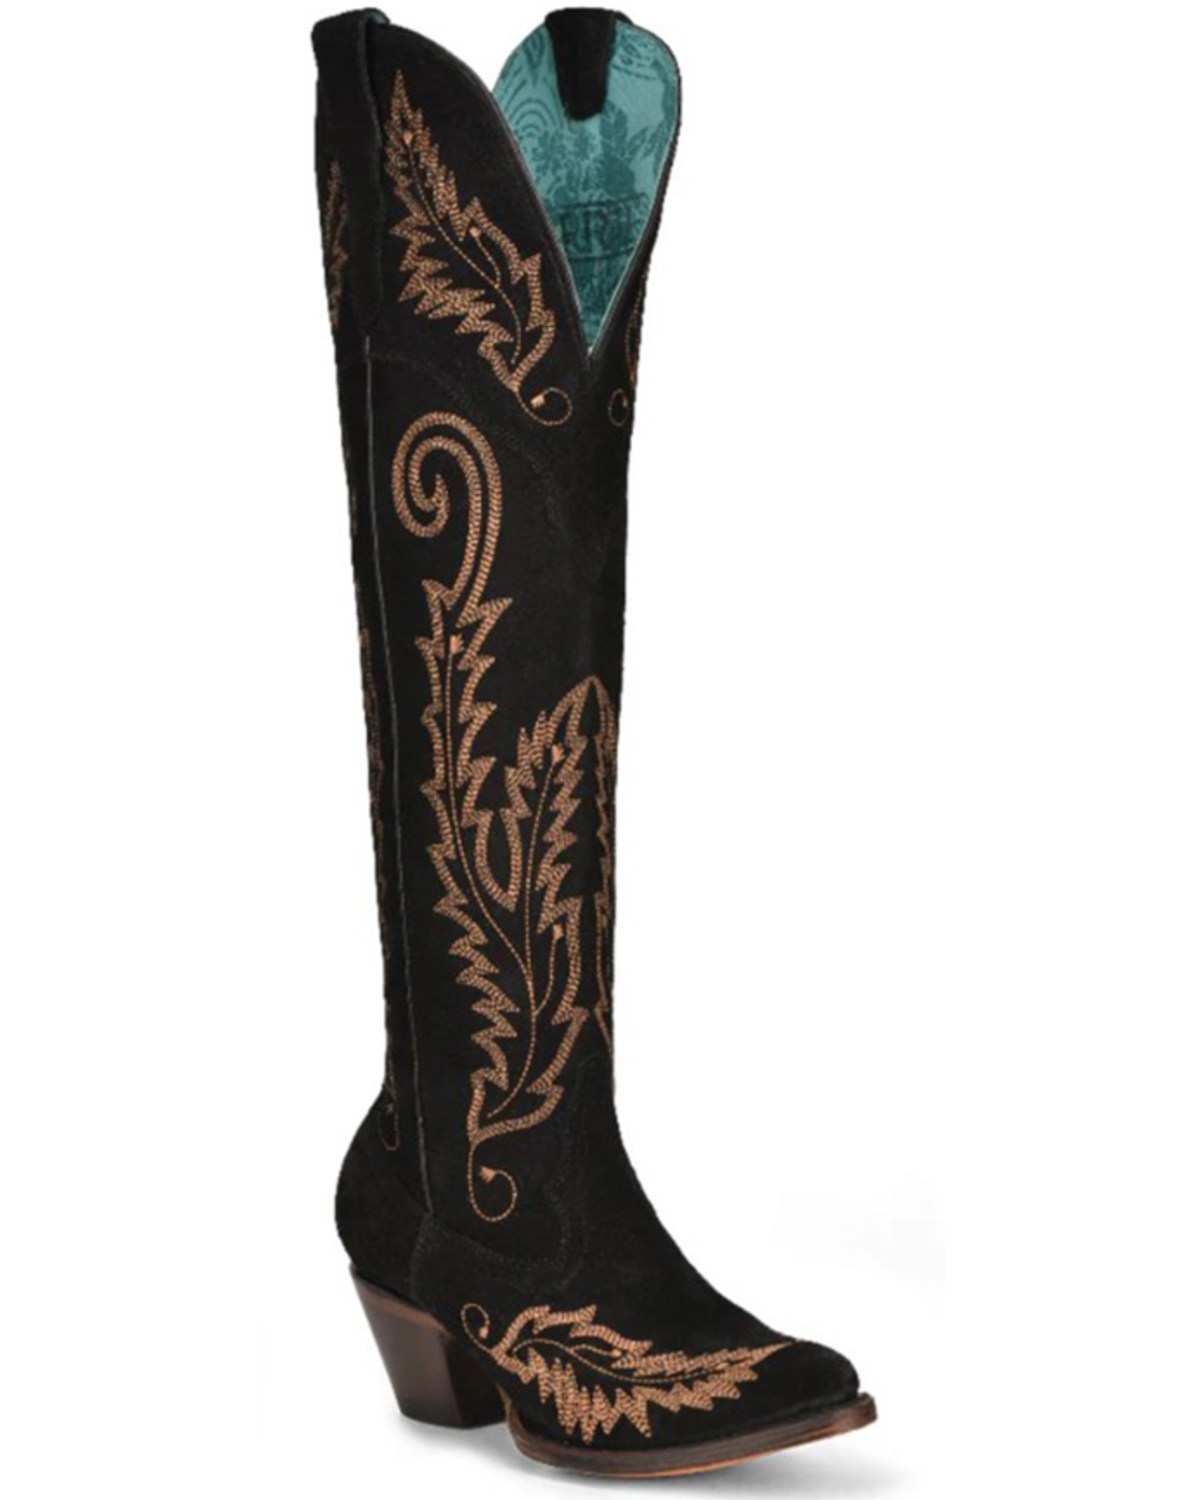 Corral Women's 15" Suede Embroidered Tall Western Boots - Medium Toe